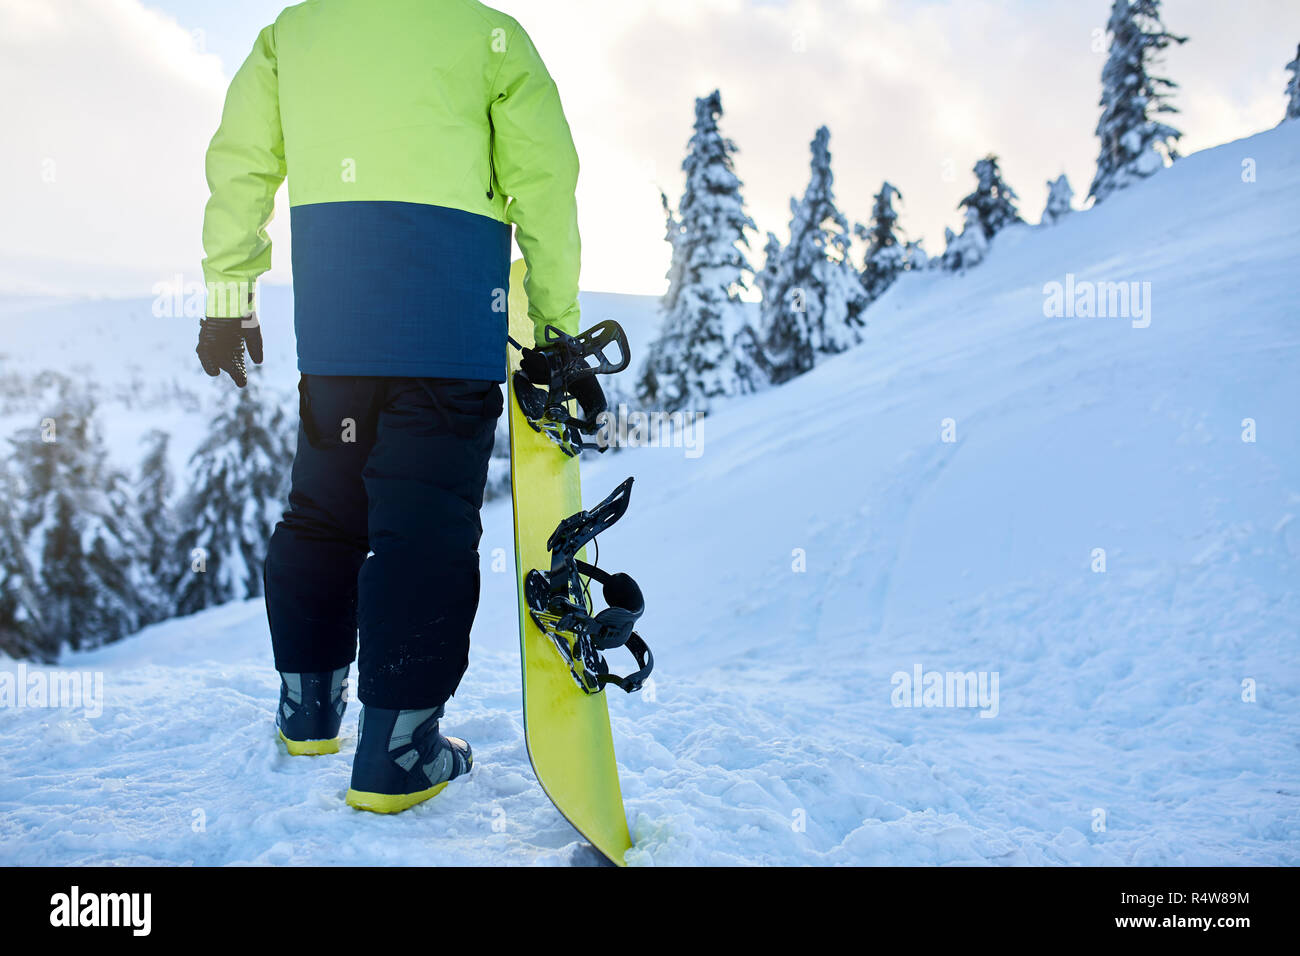 Back view of snowboarder climbing with his board on the mount for backcountry freeride session in the forest. Man with snowboard walking at ski resort. Rider lime fashionable outfit. Stock Photo